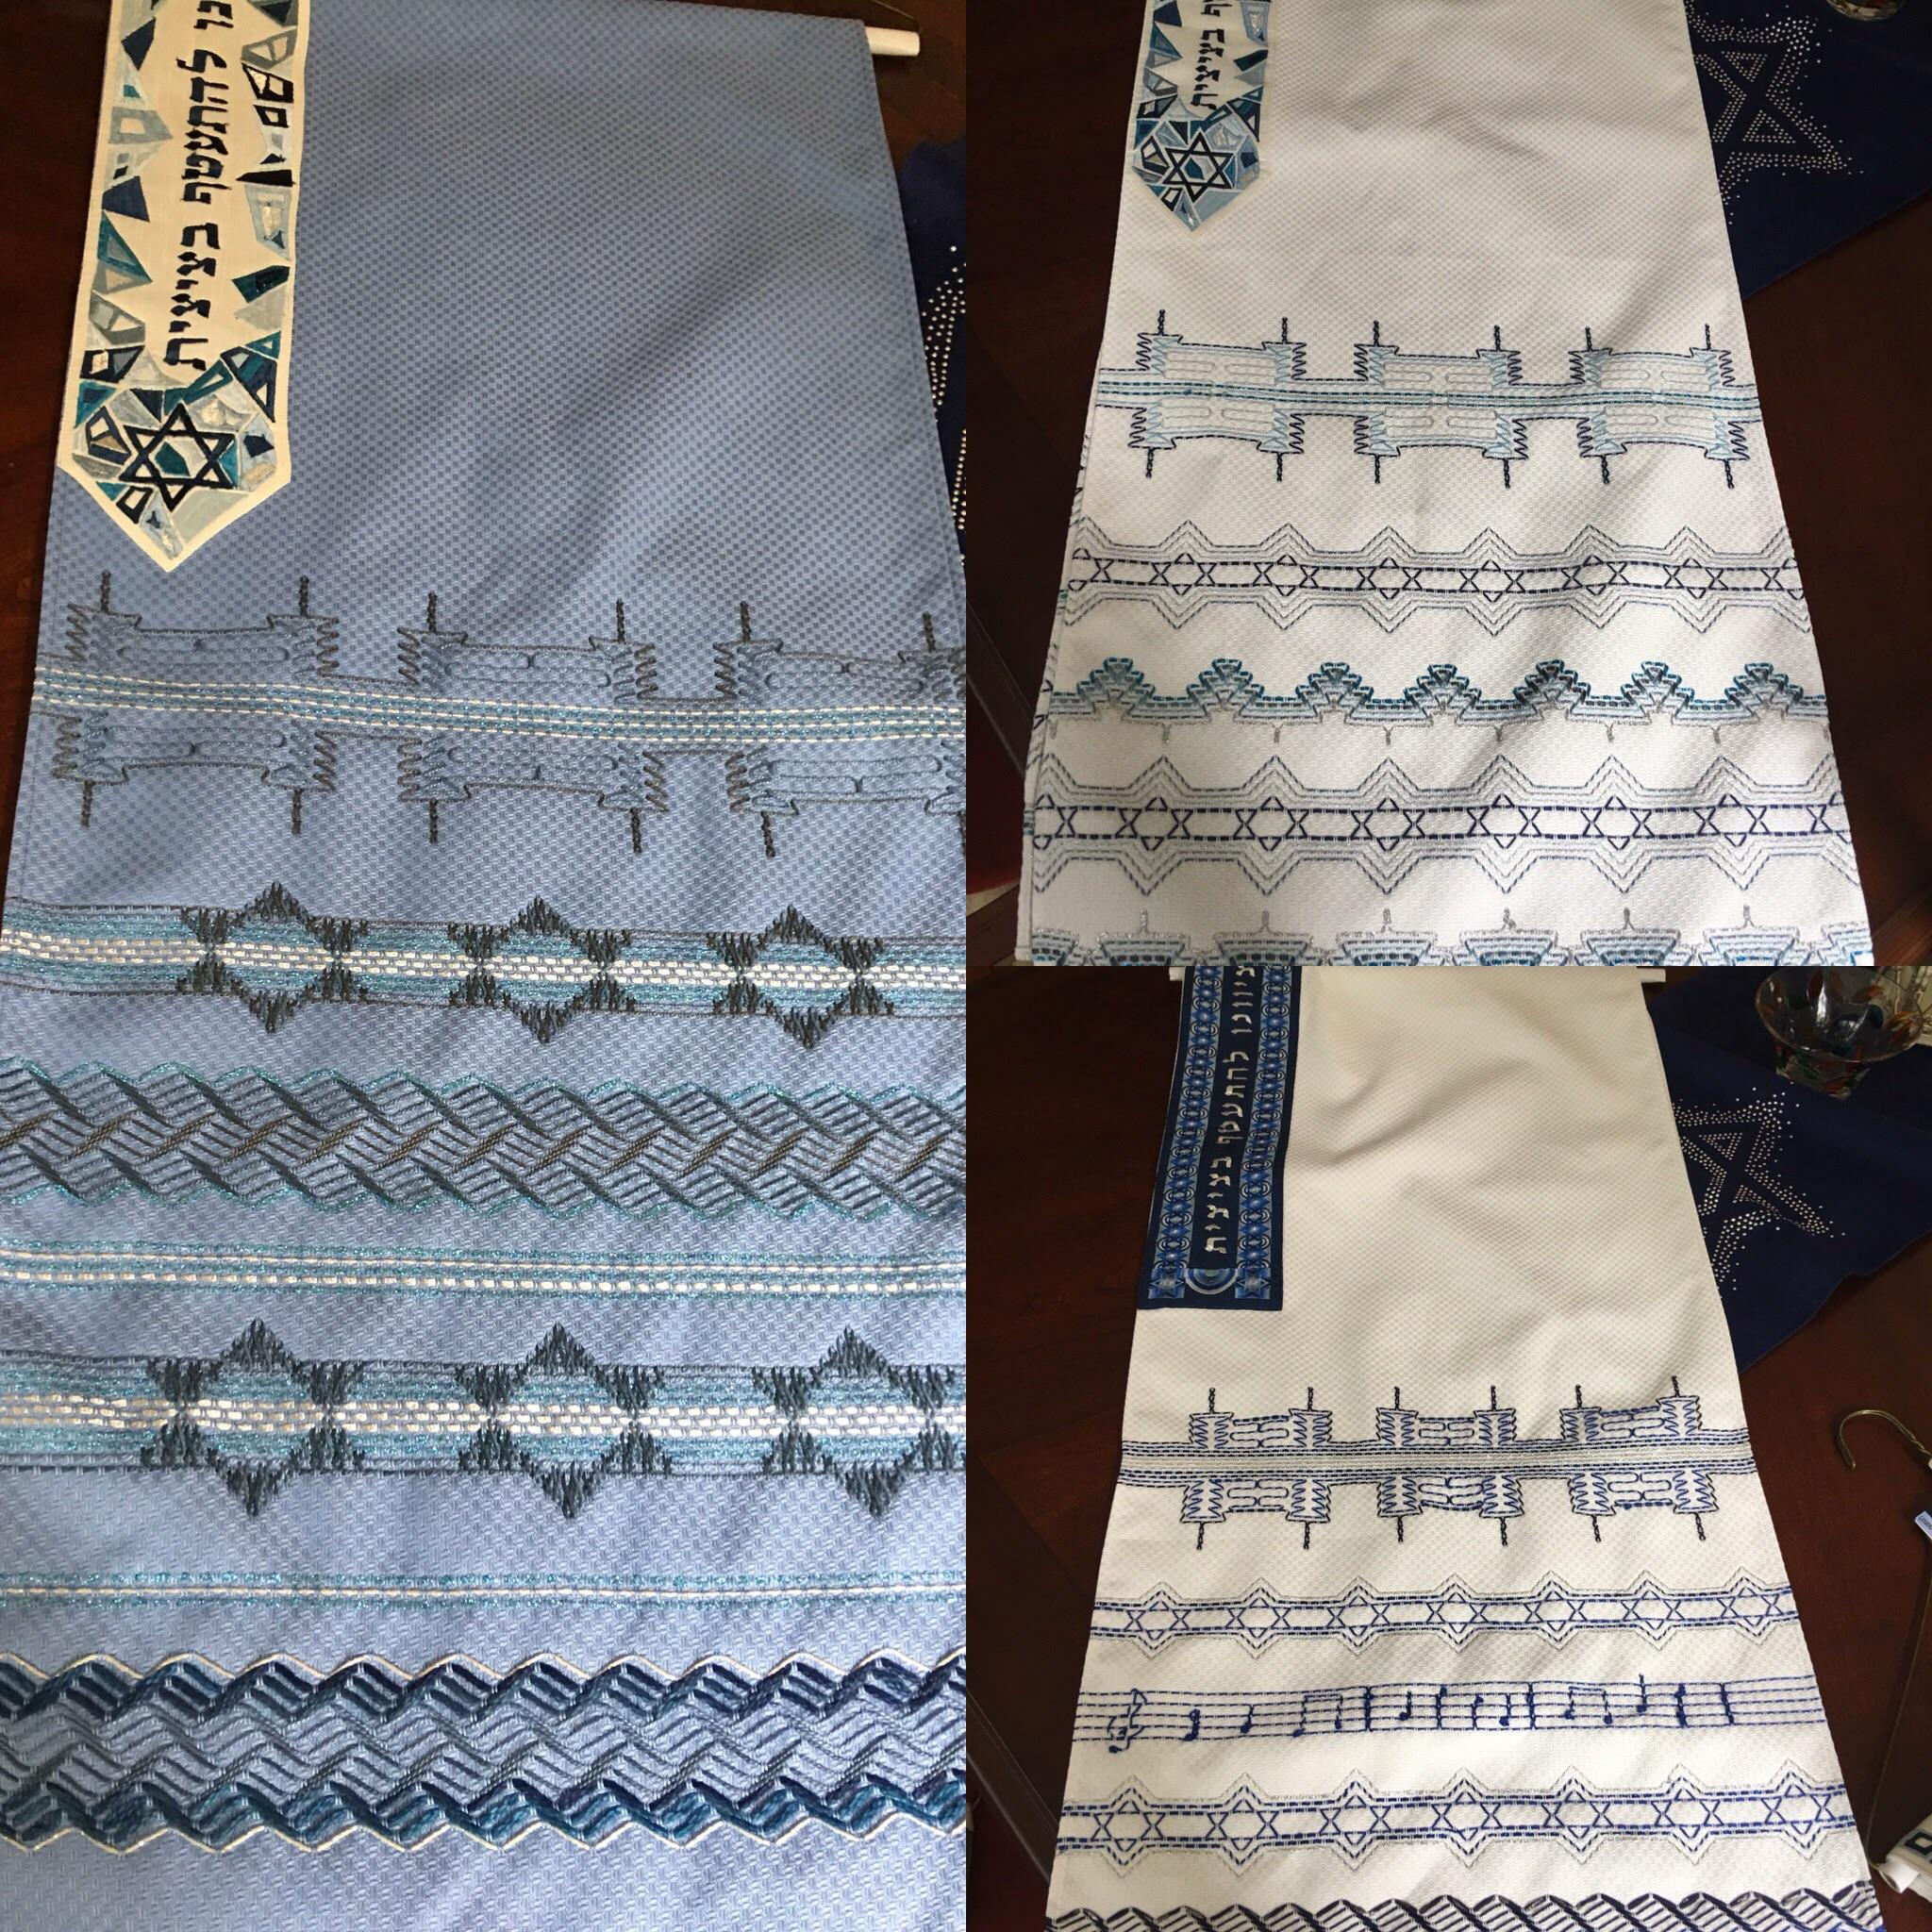 Huck Embroidery Free Patterns Jewish Huck Embroidery Is A Passion Of Mine Any Other Mother